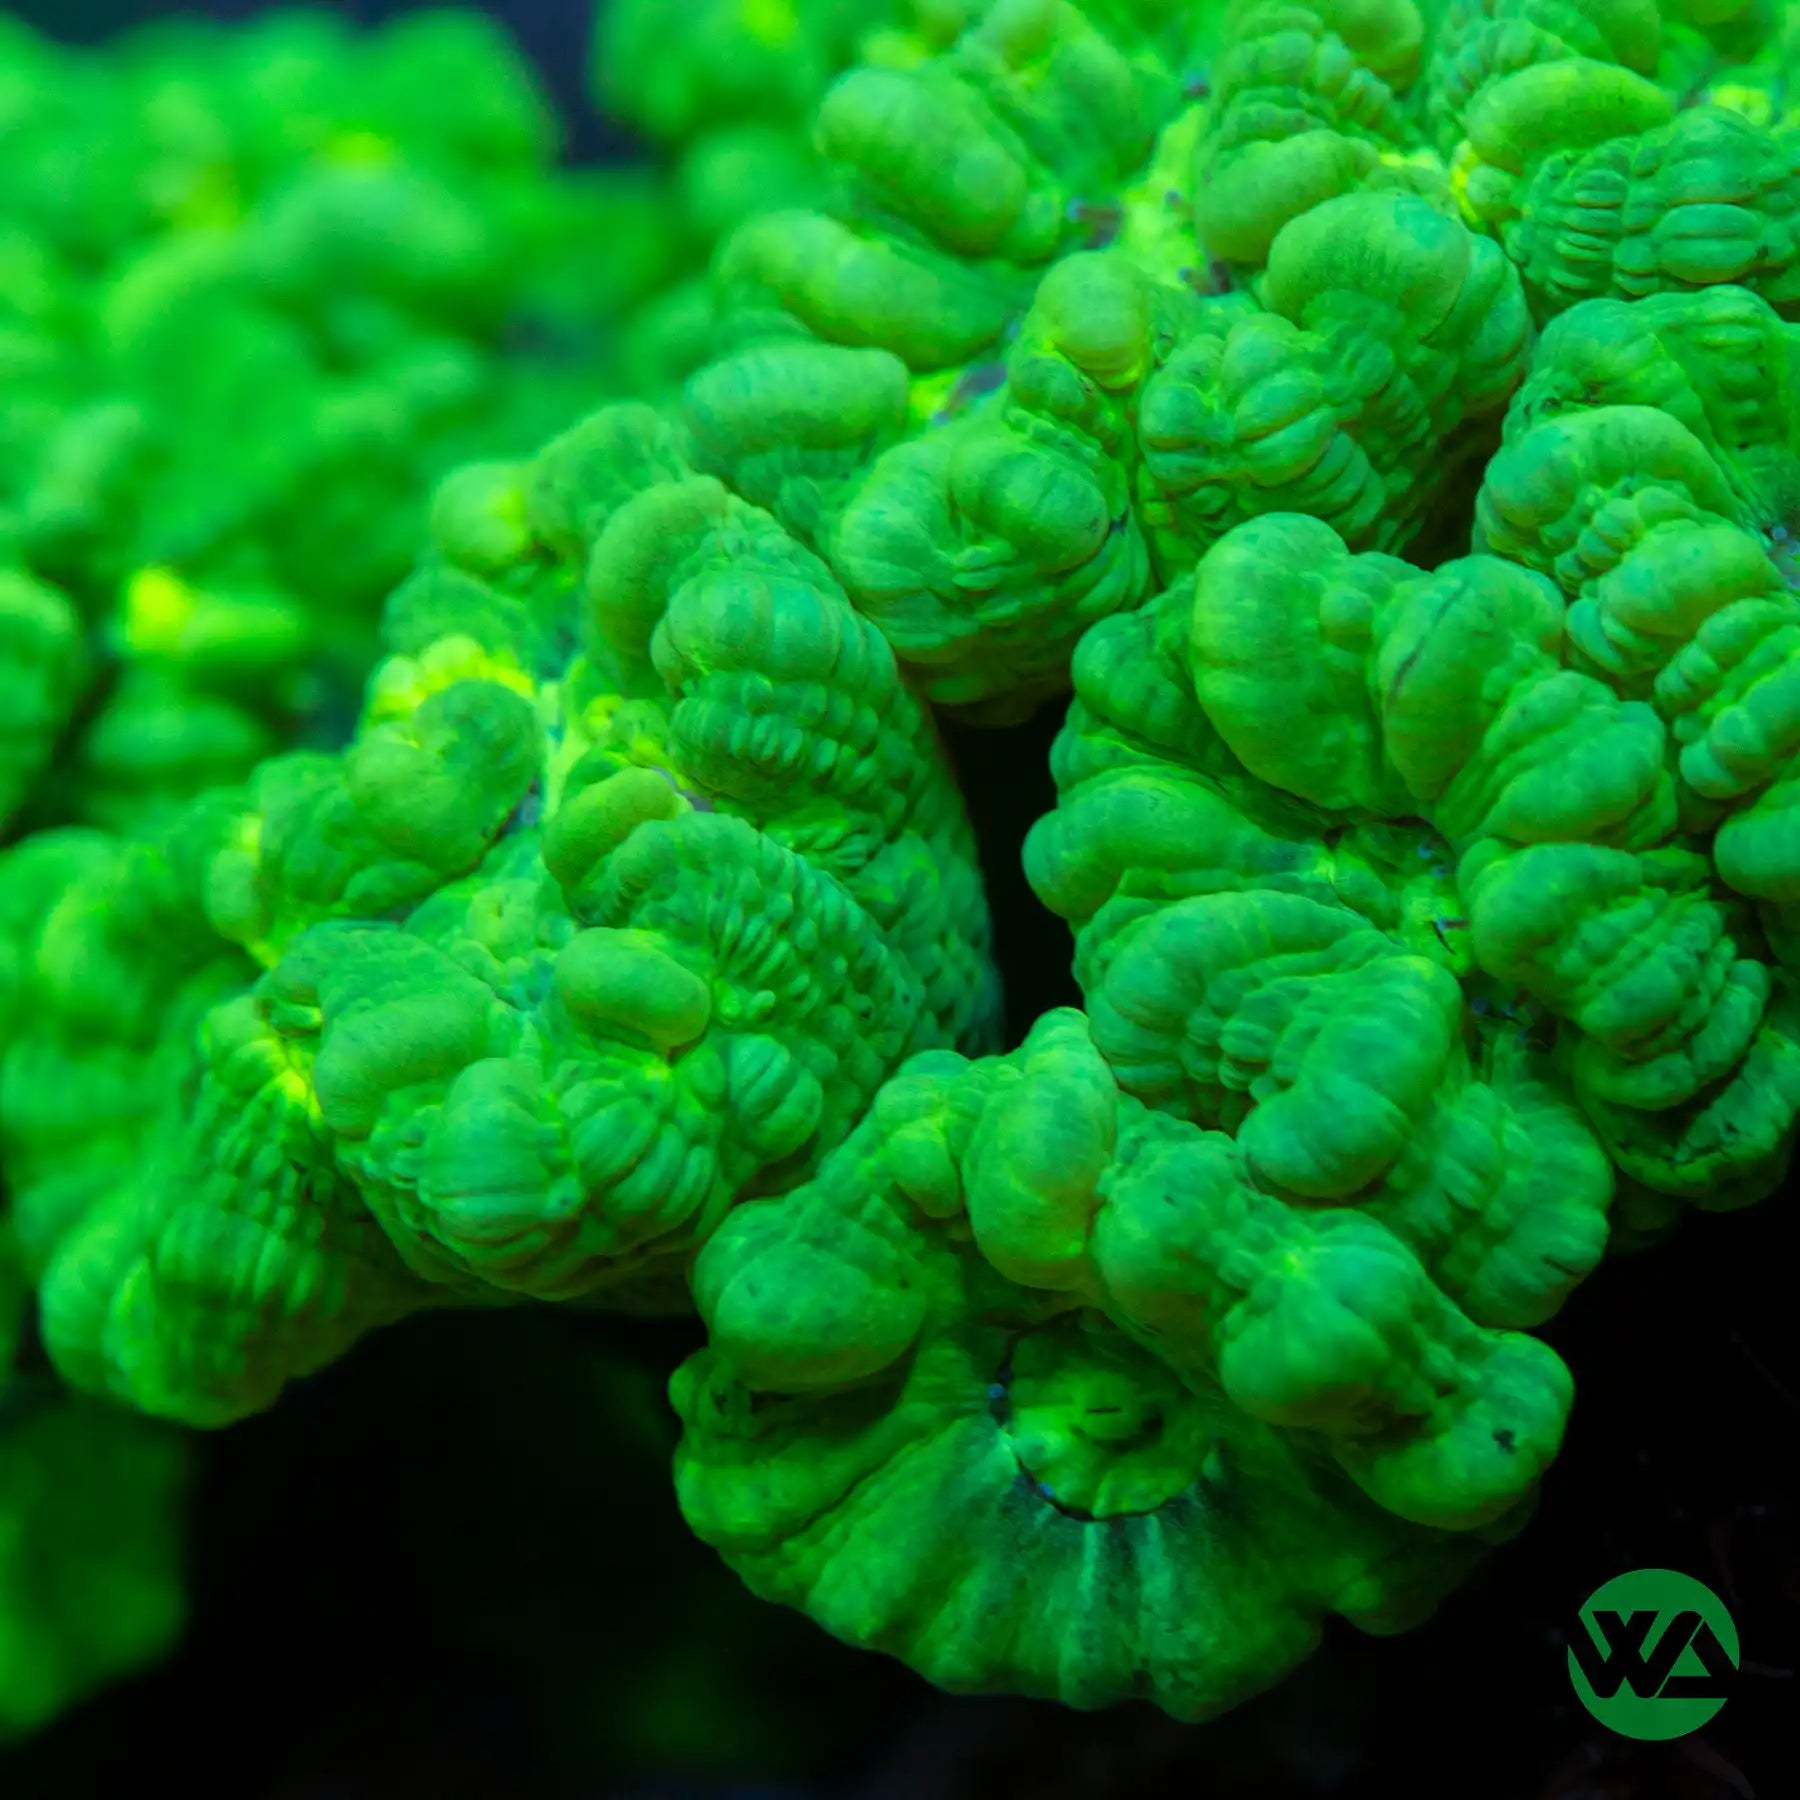 Neon Green Trumpet Candy cane coral